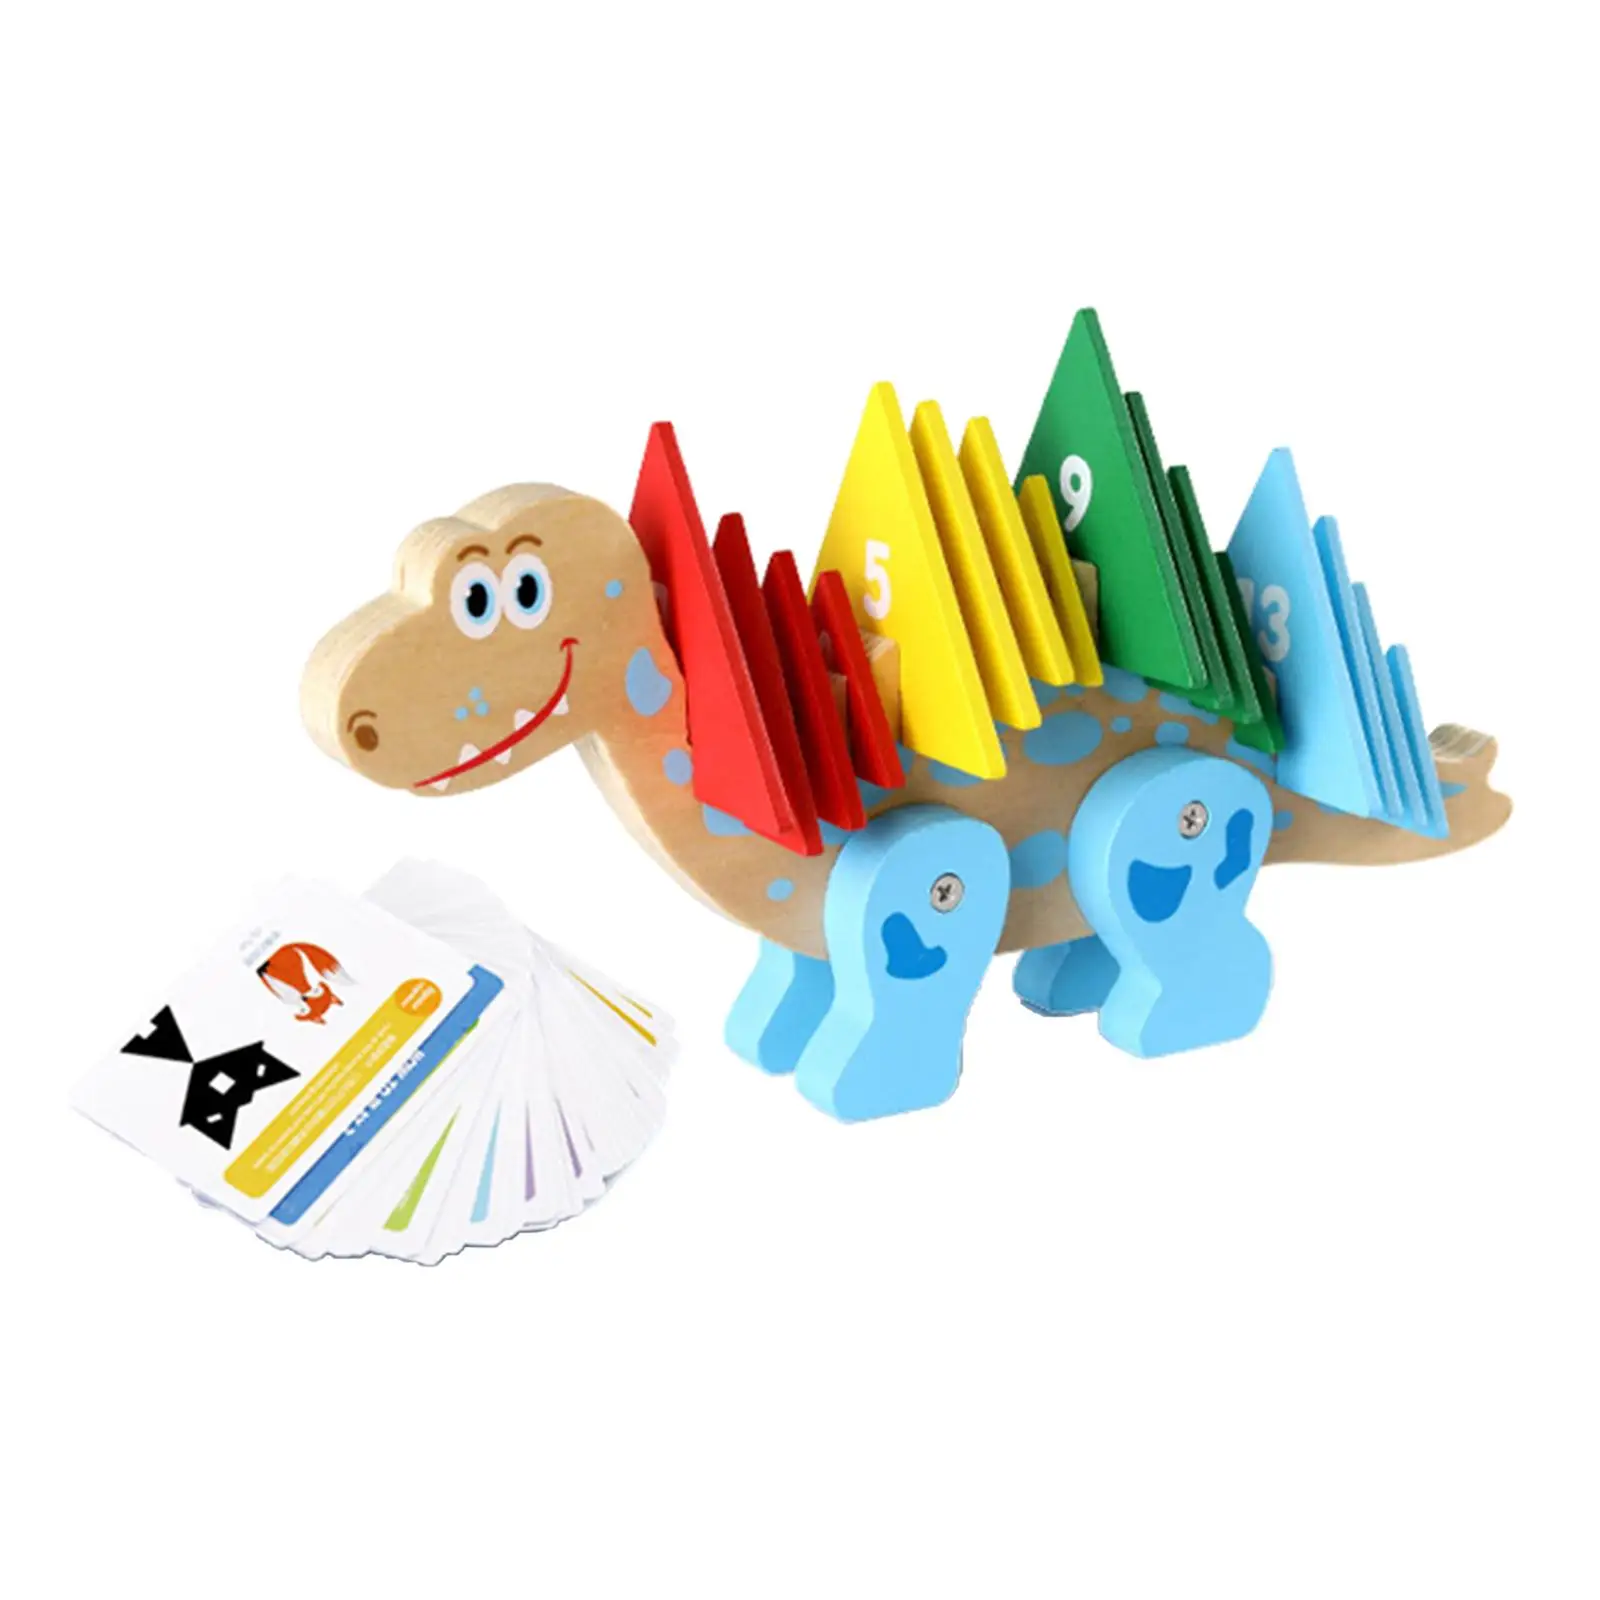 Kids Math Toy Dinosaur Toy Logical Thinking Educational Toys Adorable Lightweight Math Learning Toy for Preschool Living Room